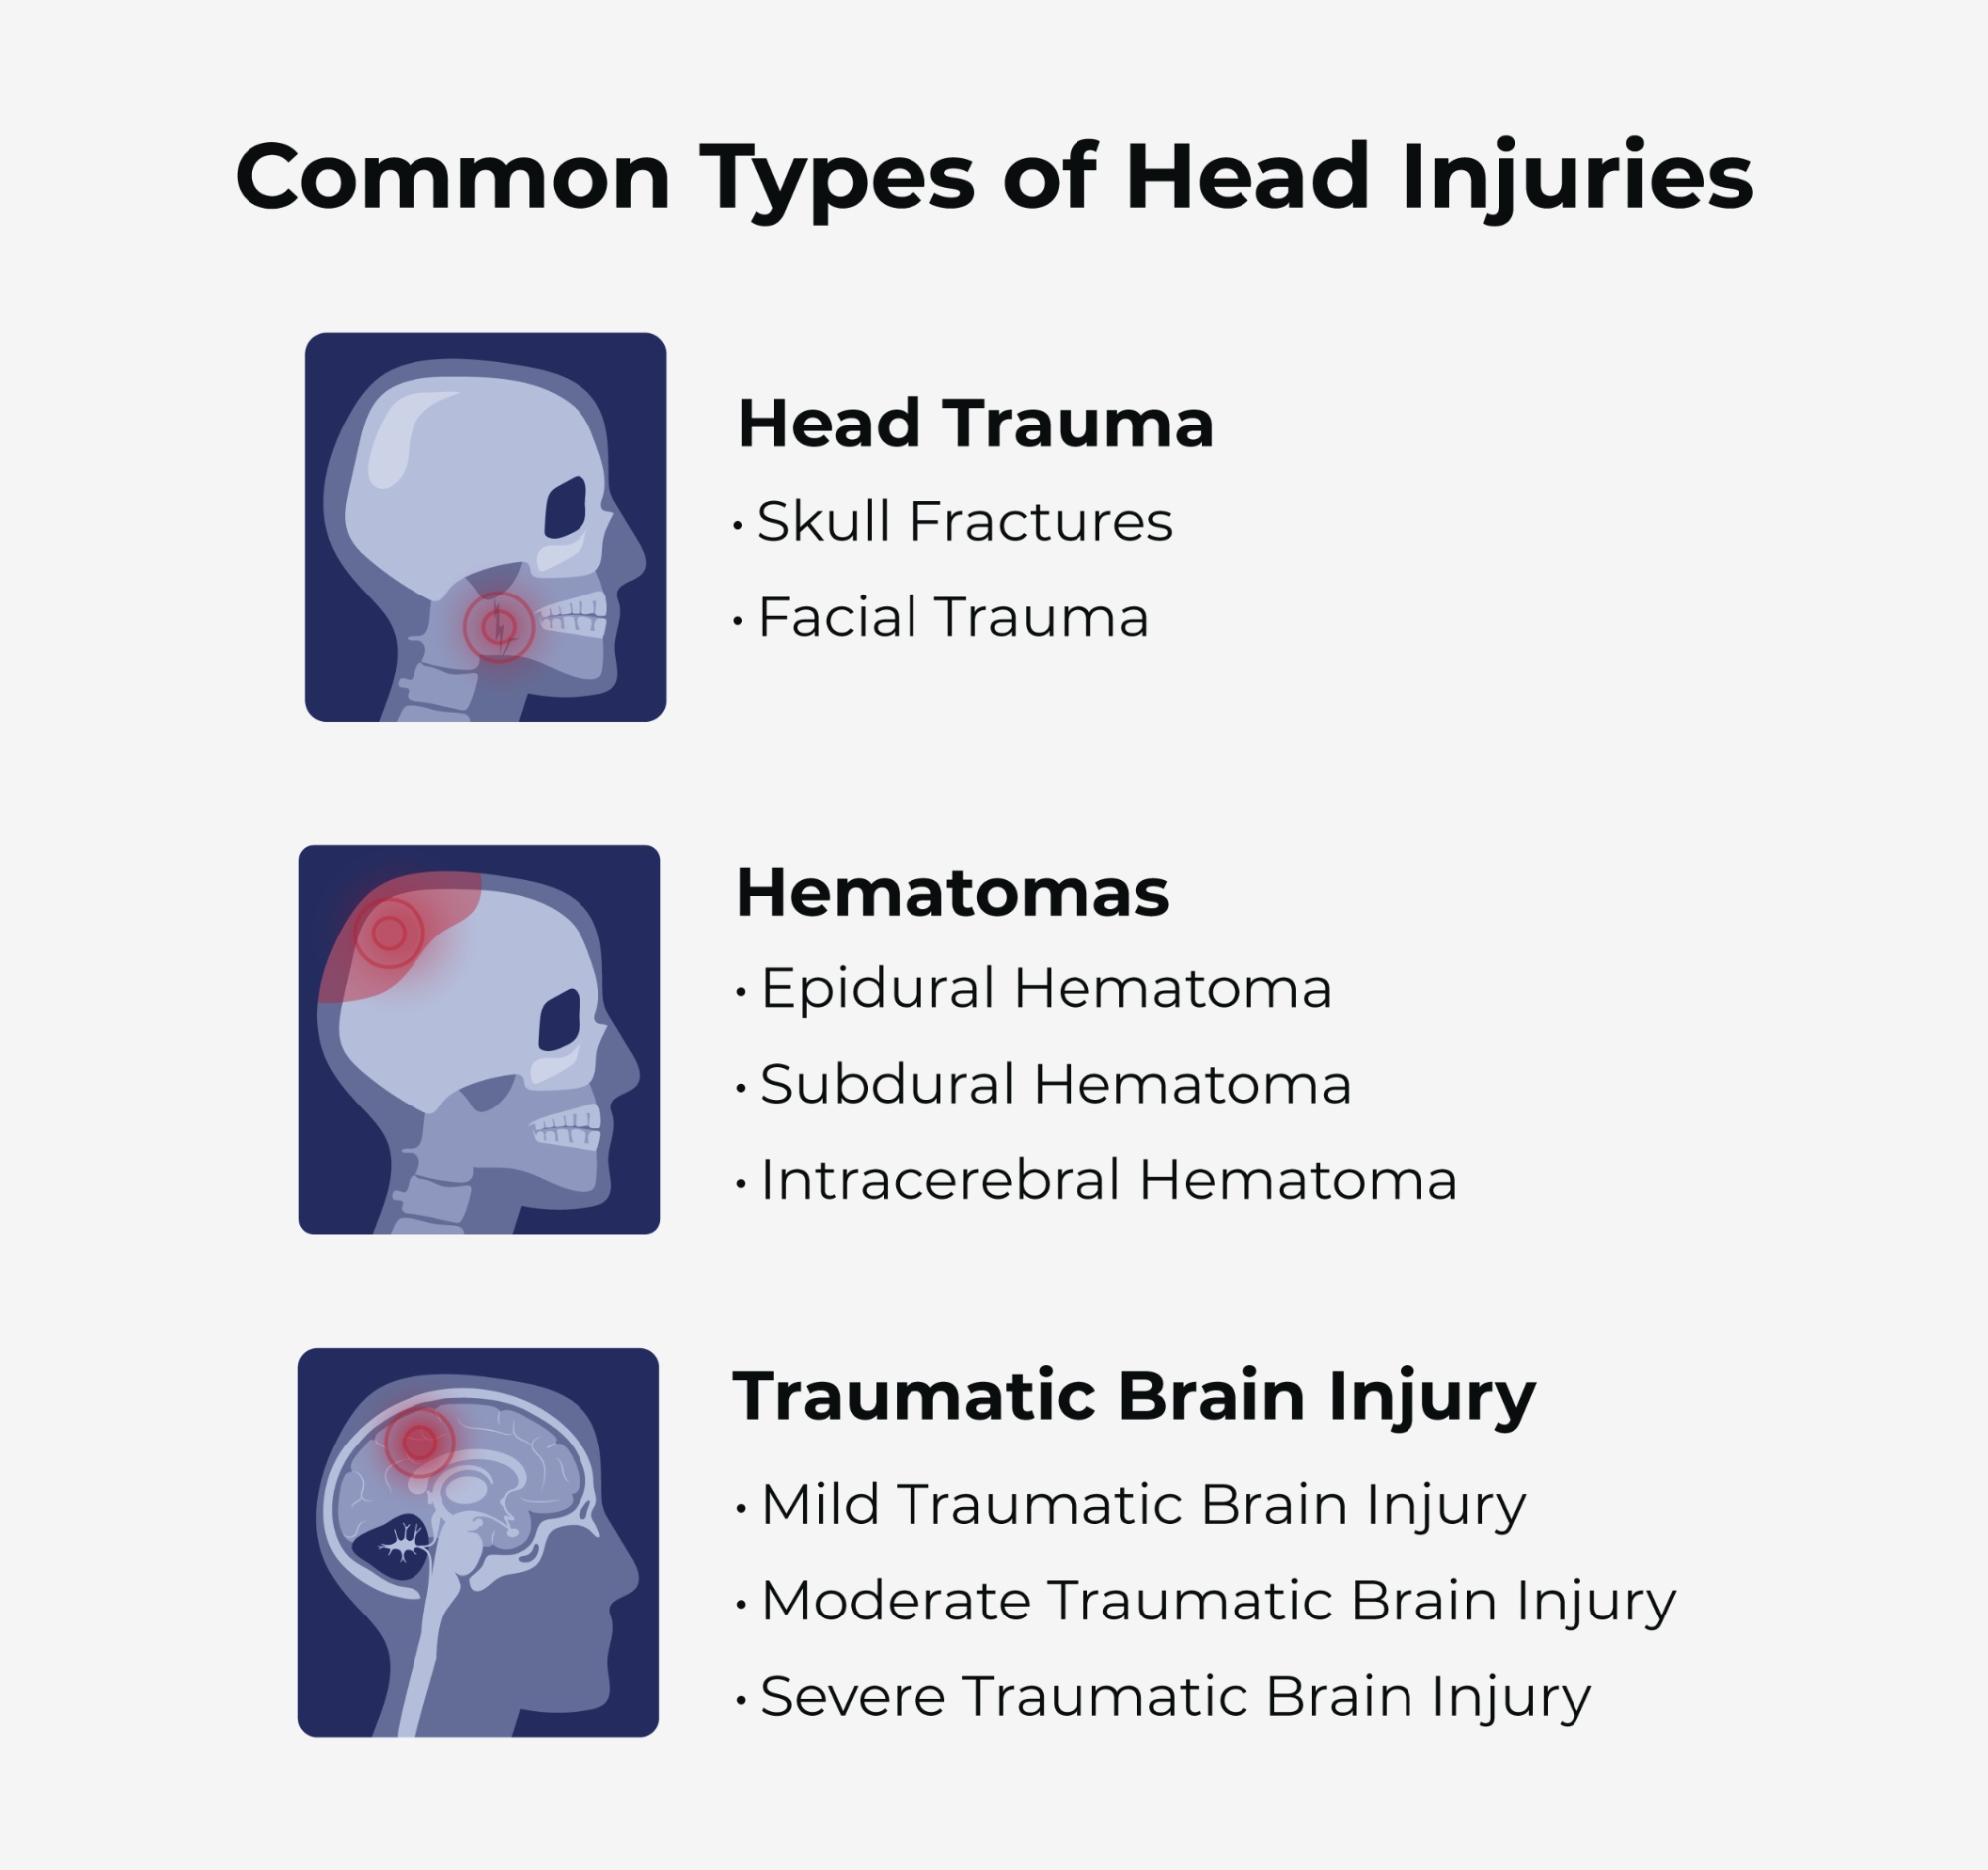 Common types of head injuries